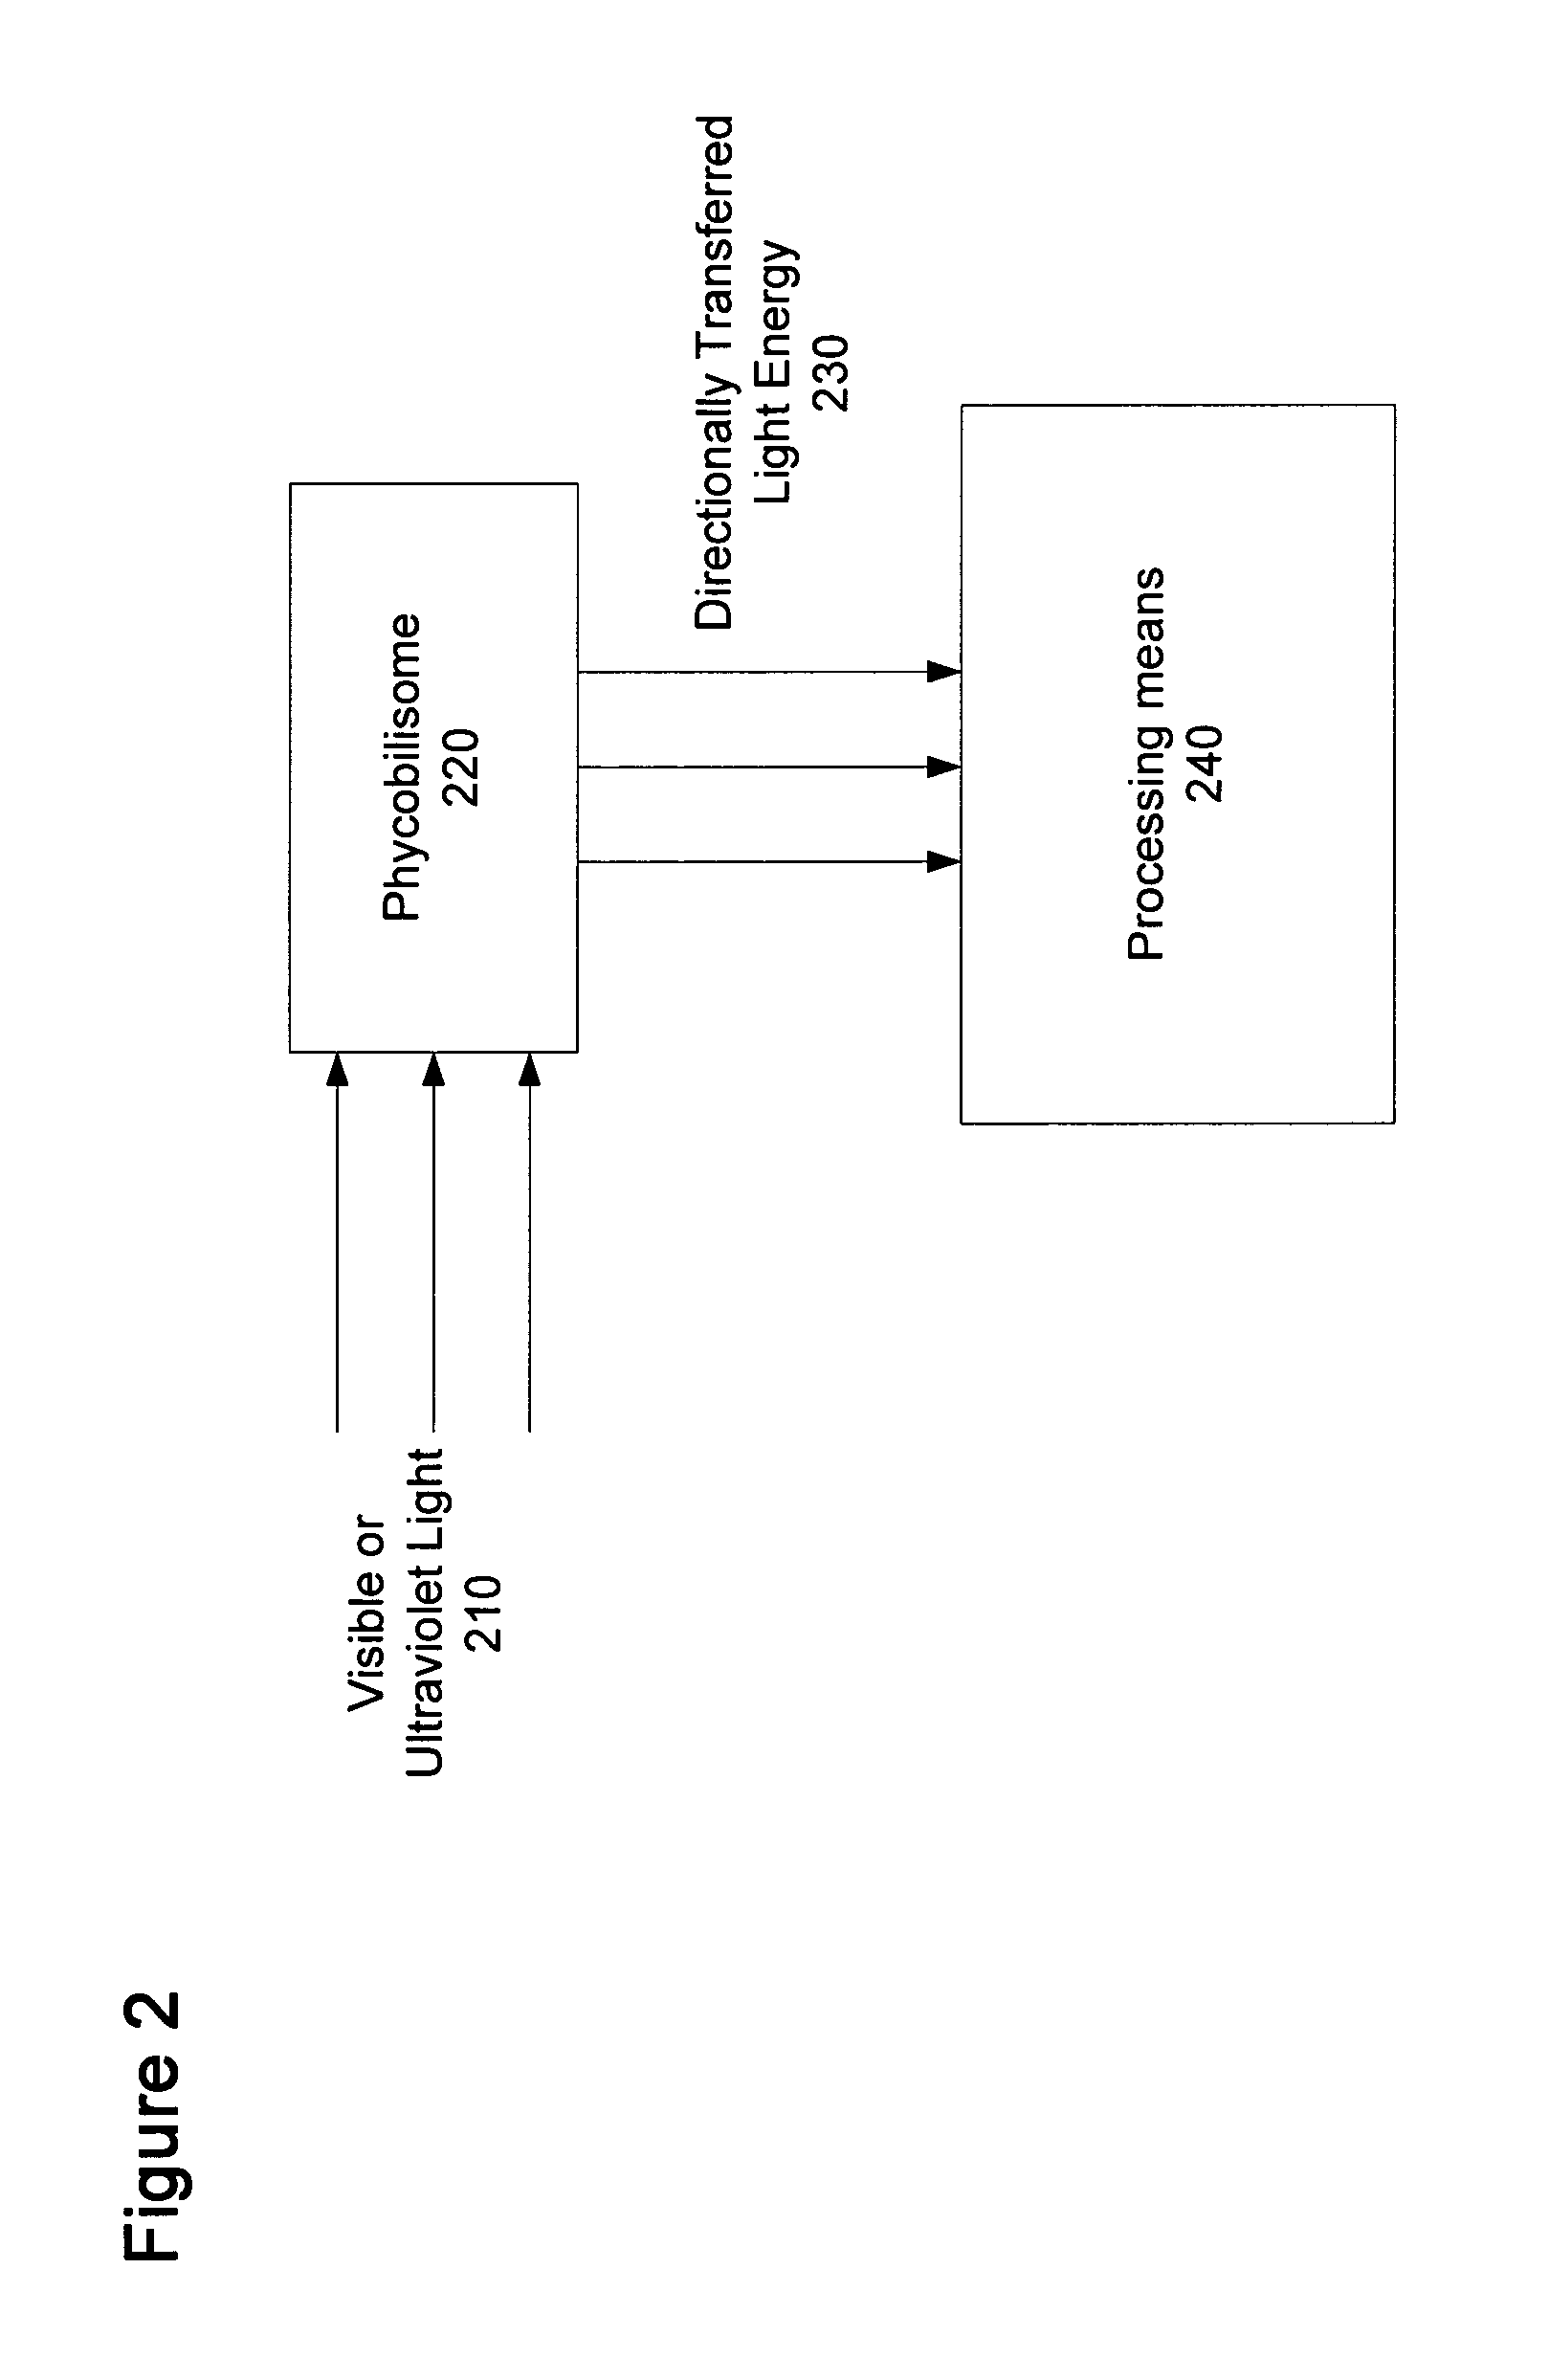 Signal processing devices comprising biological and bio-mimetic components